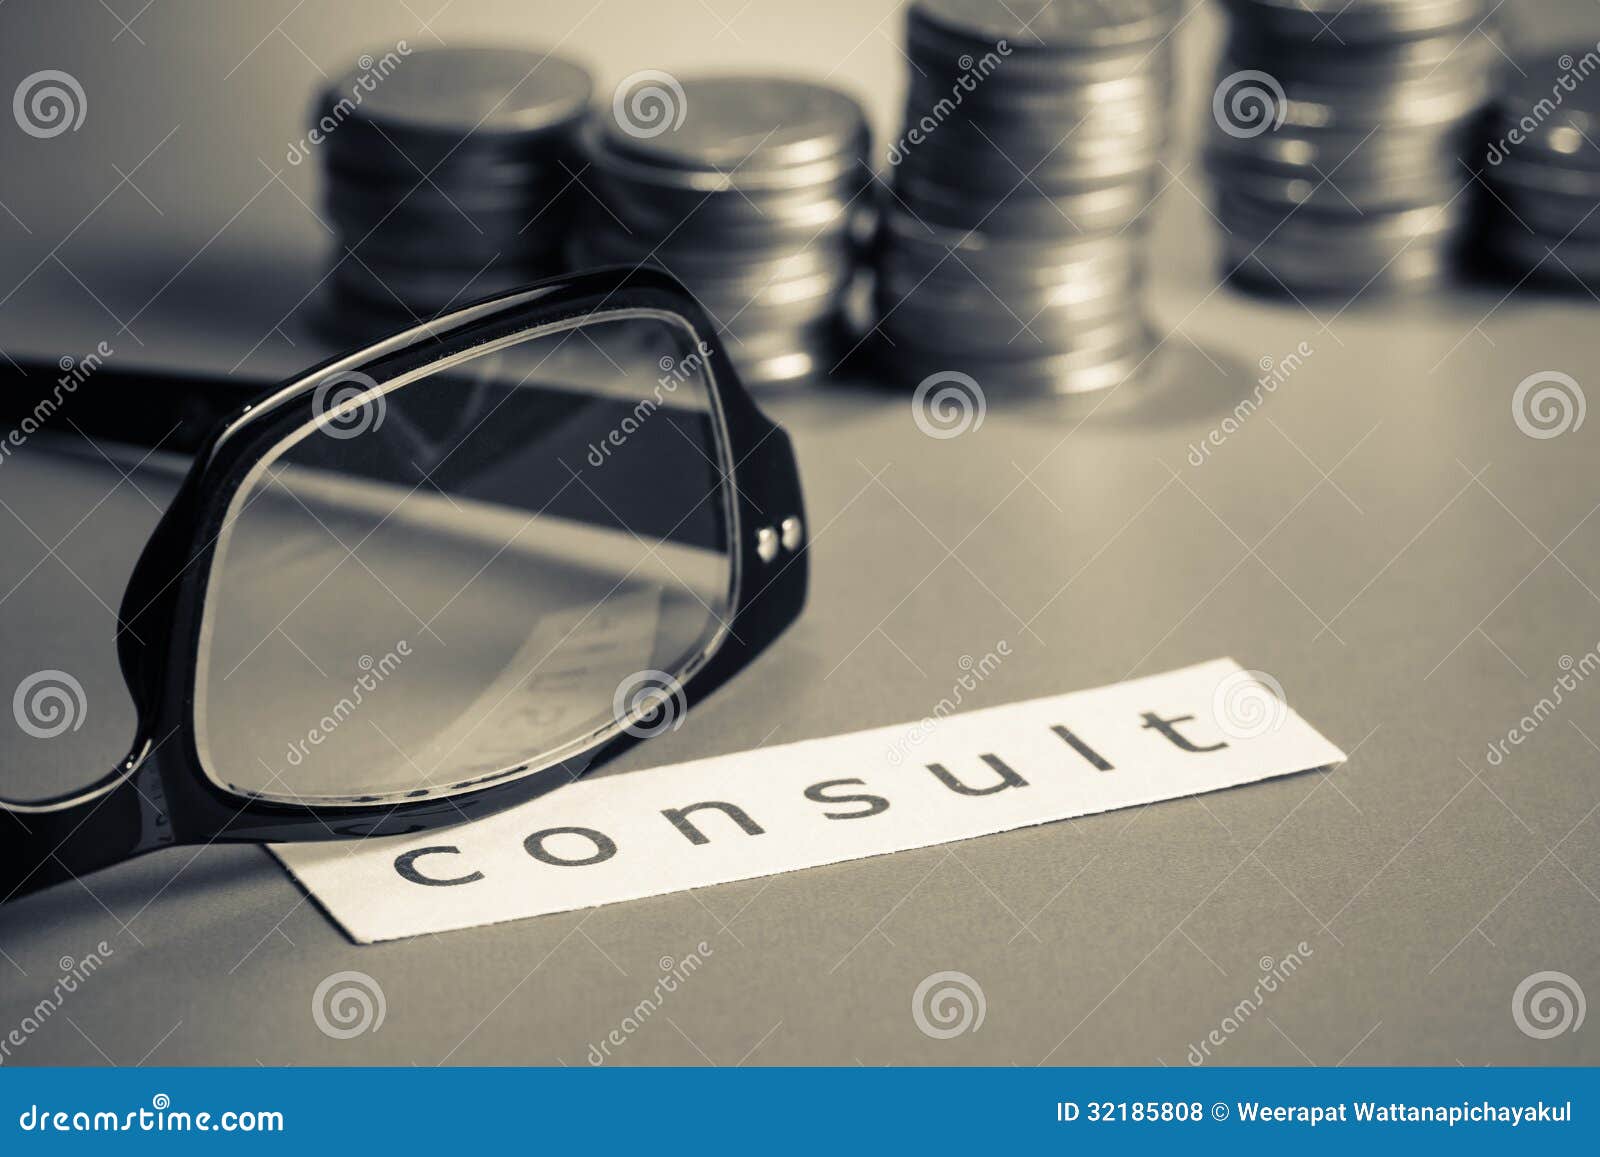 financial consult